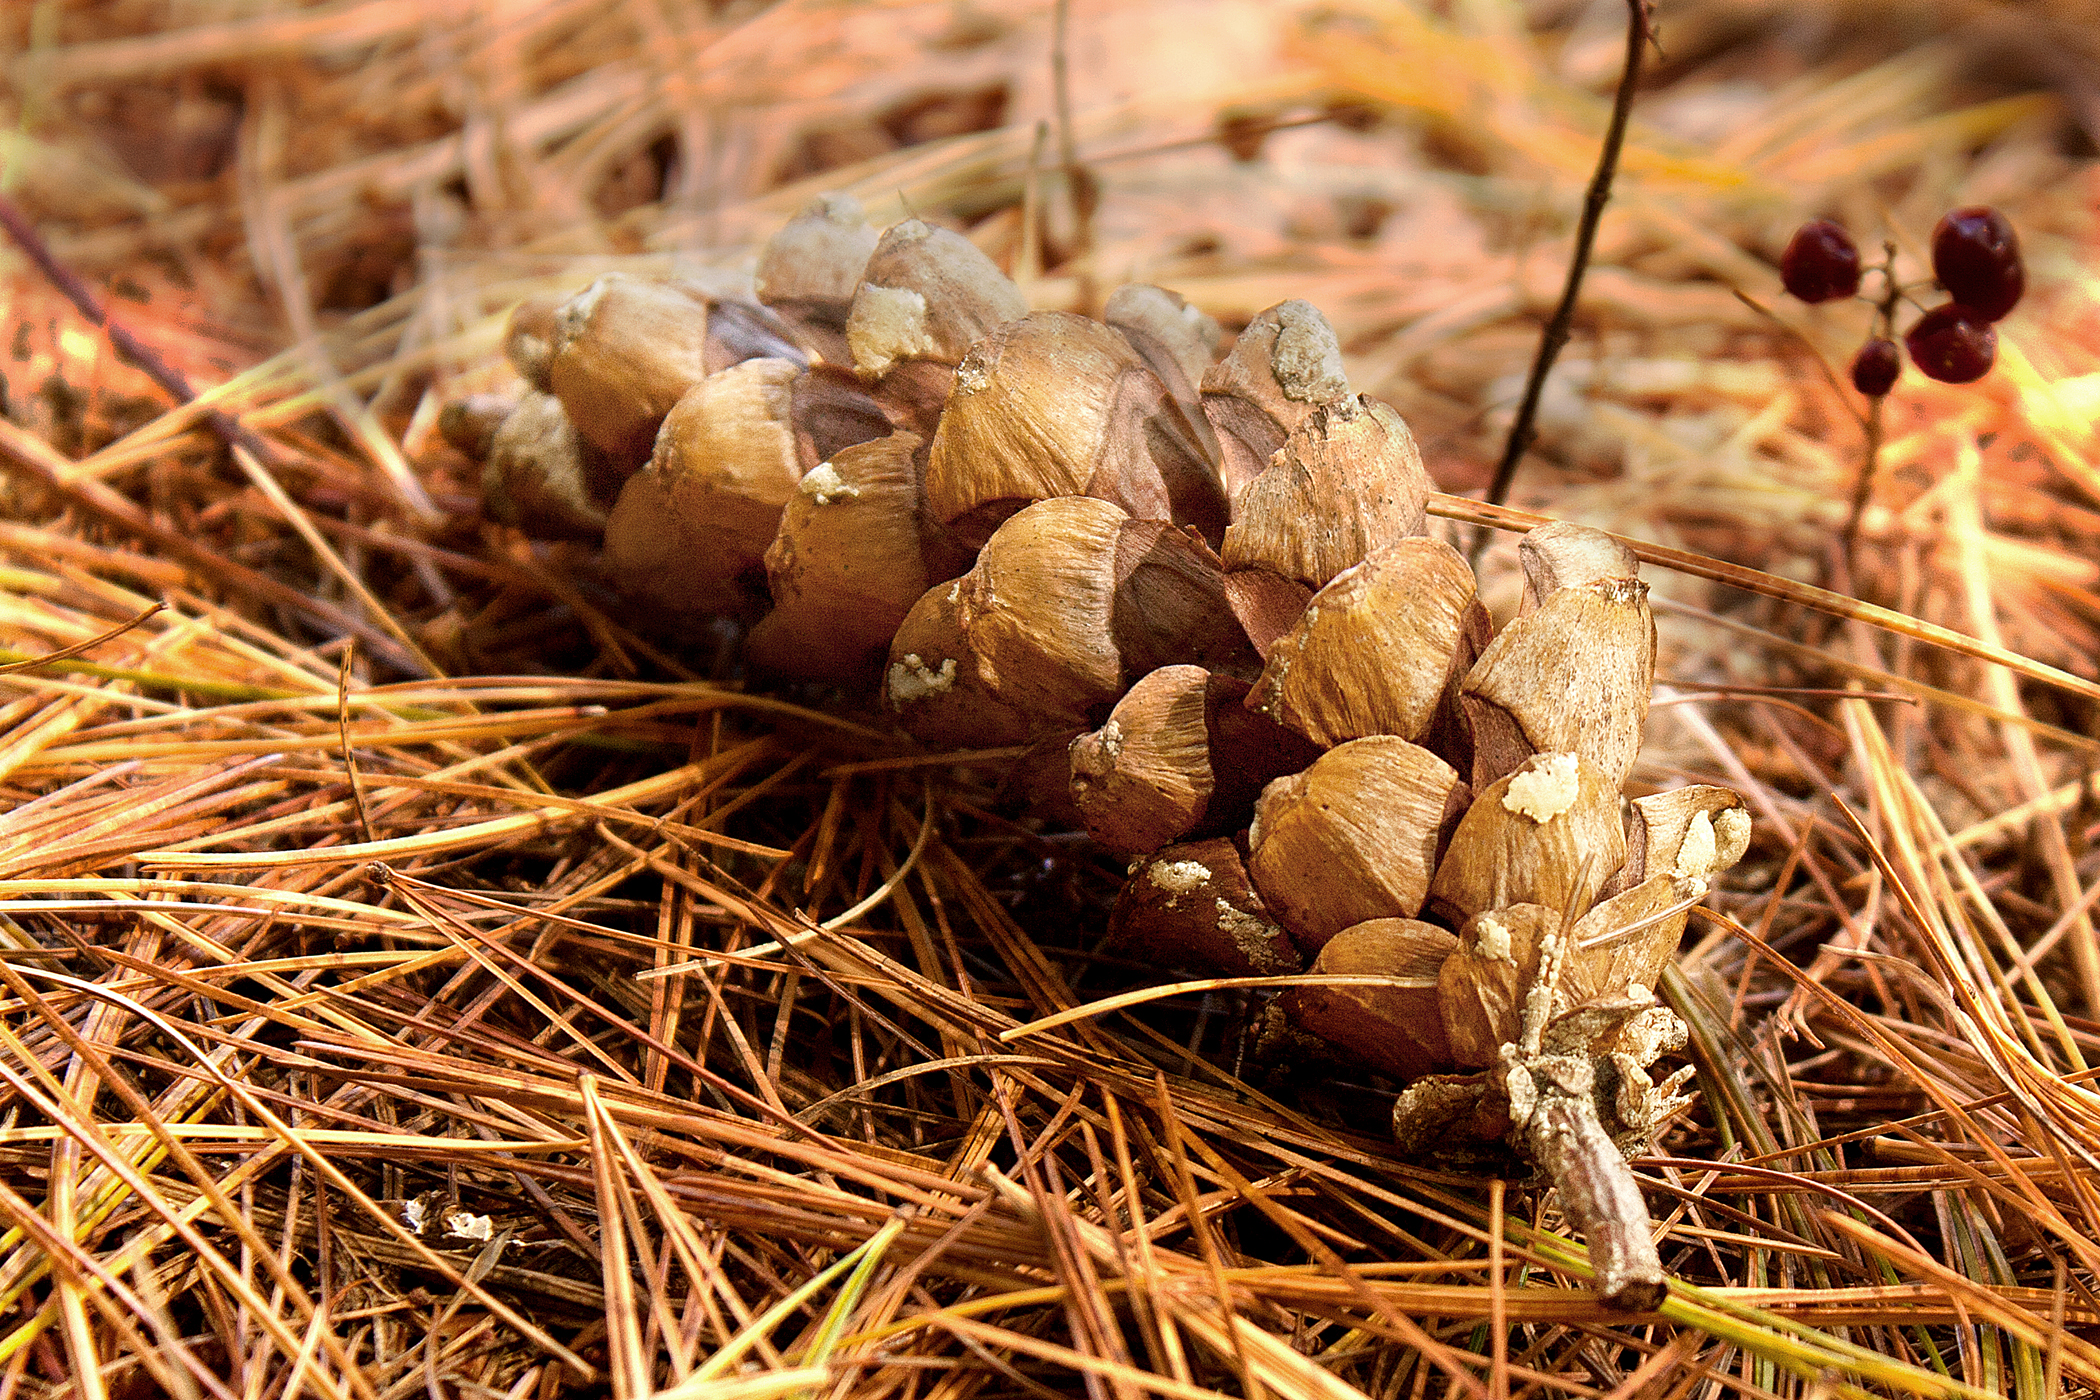 Eastern White Pine Seed Cone (user submitted)